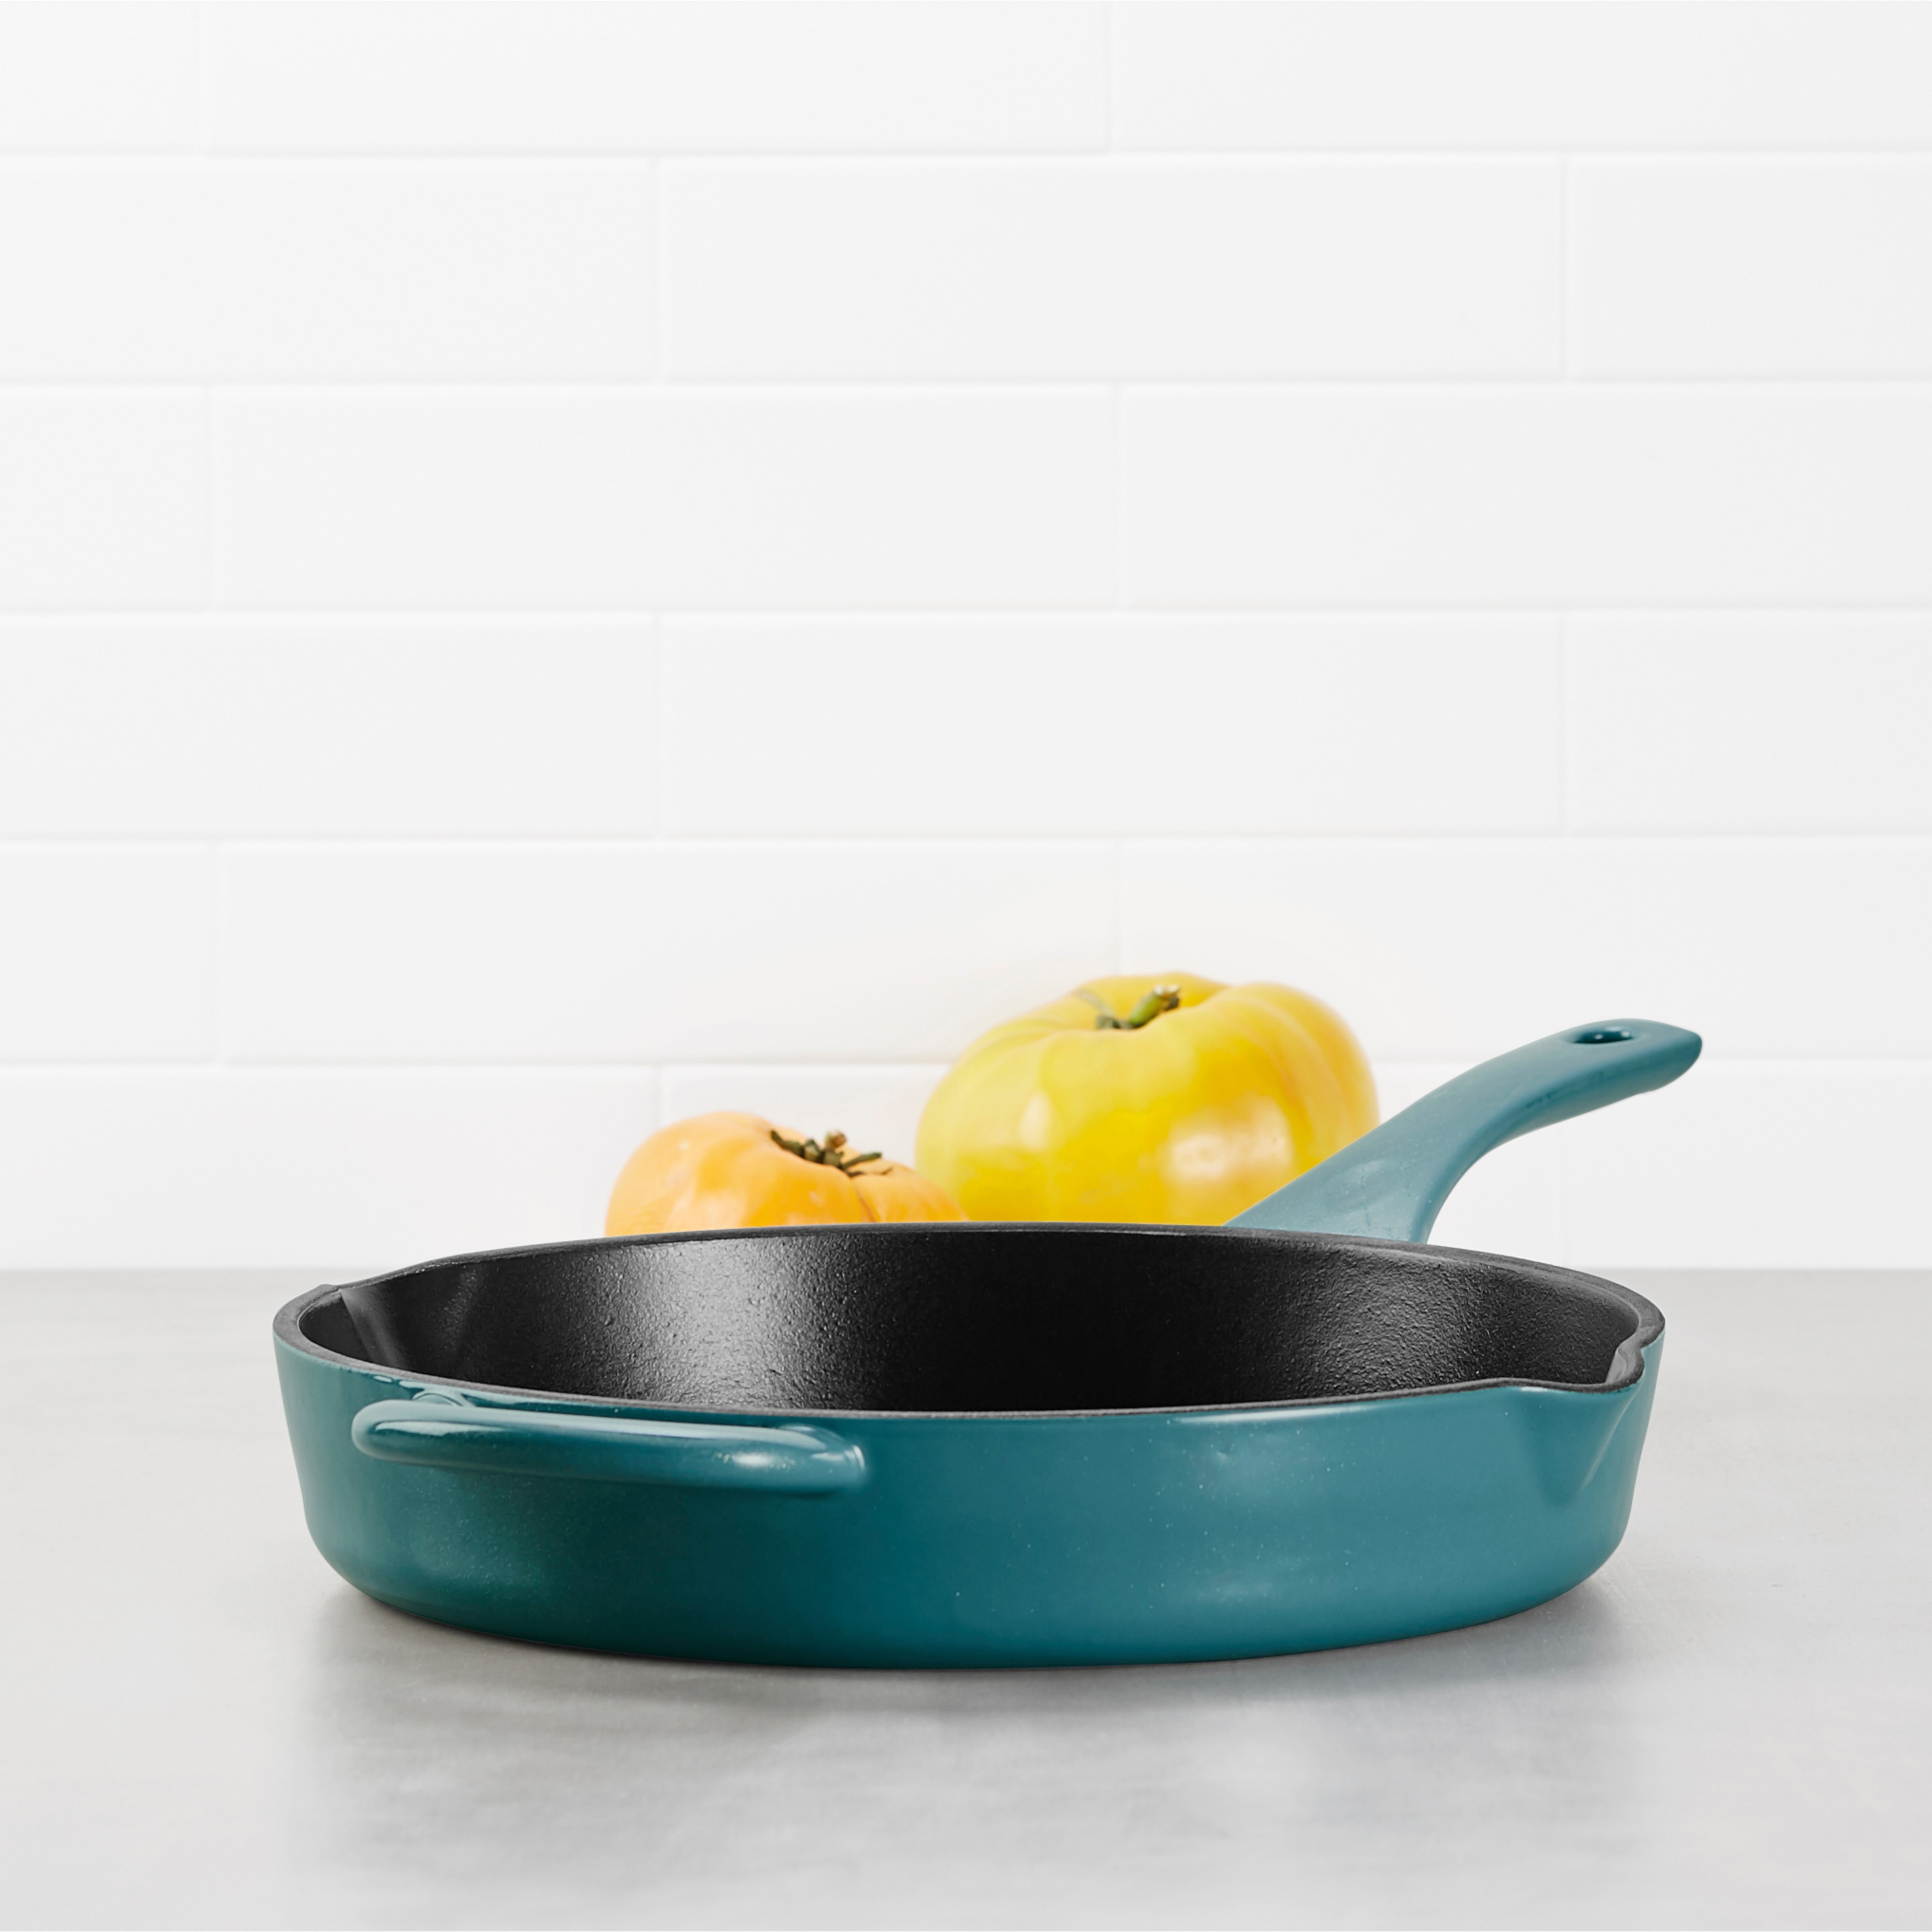 https://ak1.ostkcdn.com/images/products/20005408/Ayesha-Curry-Cast-Iron-Enamel-Skillet-with-Pour-Spouts-10-Inch-ce3a2b60-5cbe-4777-a9c6-aeeaaafb39d5.jpg